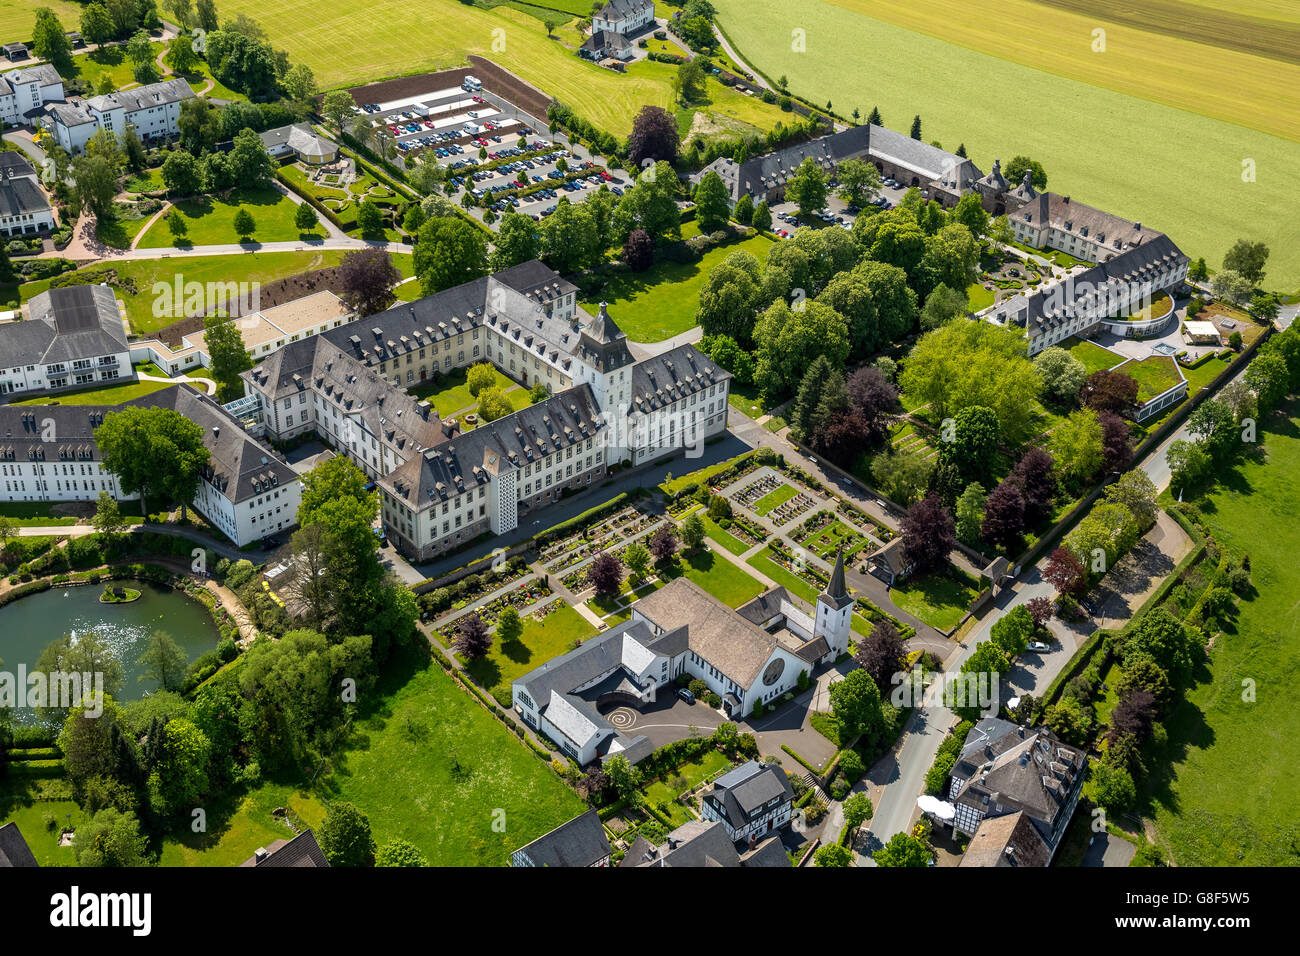 Aerial view, monastery County, specialist hospital, lung clinic, Borromäerinnen, Merciful Sisters of St. Charles Borromeo, Stock Photo